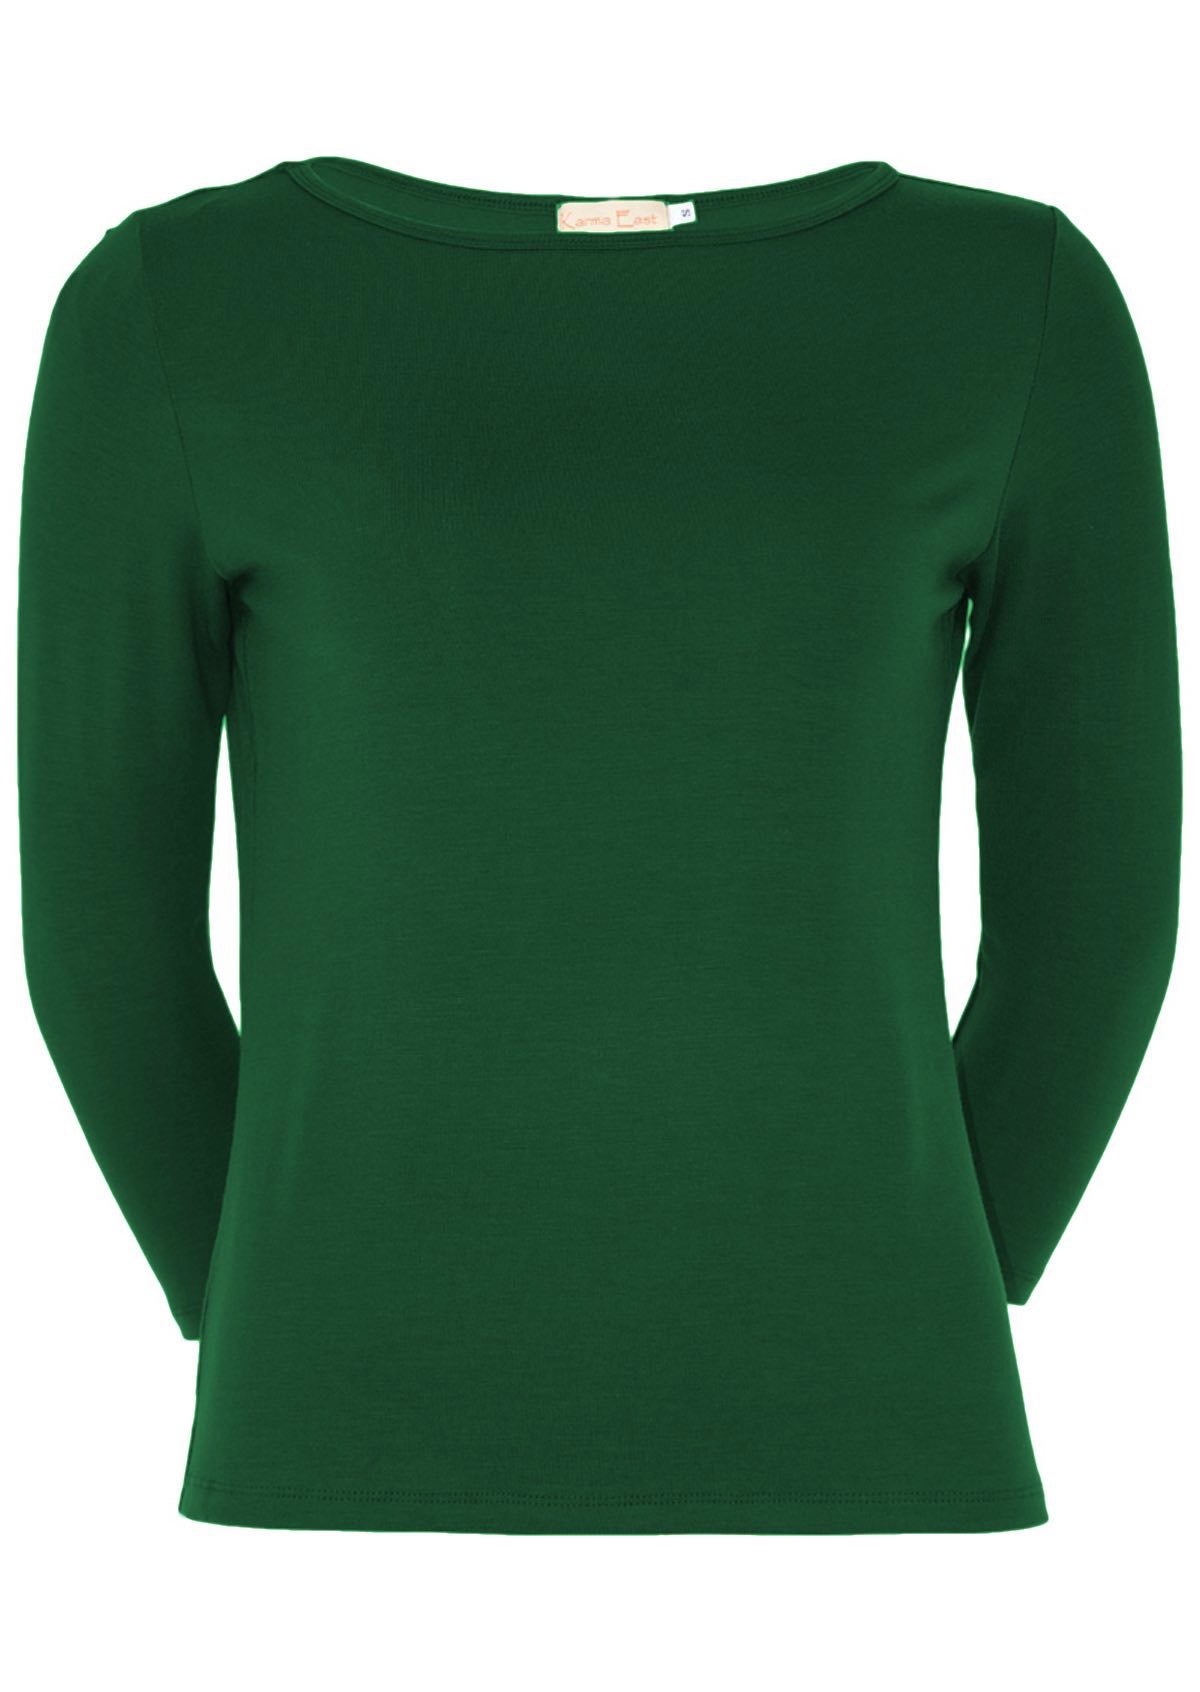 Front view of women's rayon boat neck green 3/4 sleeve top.